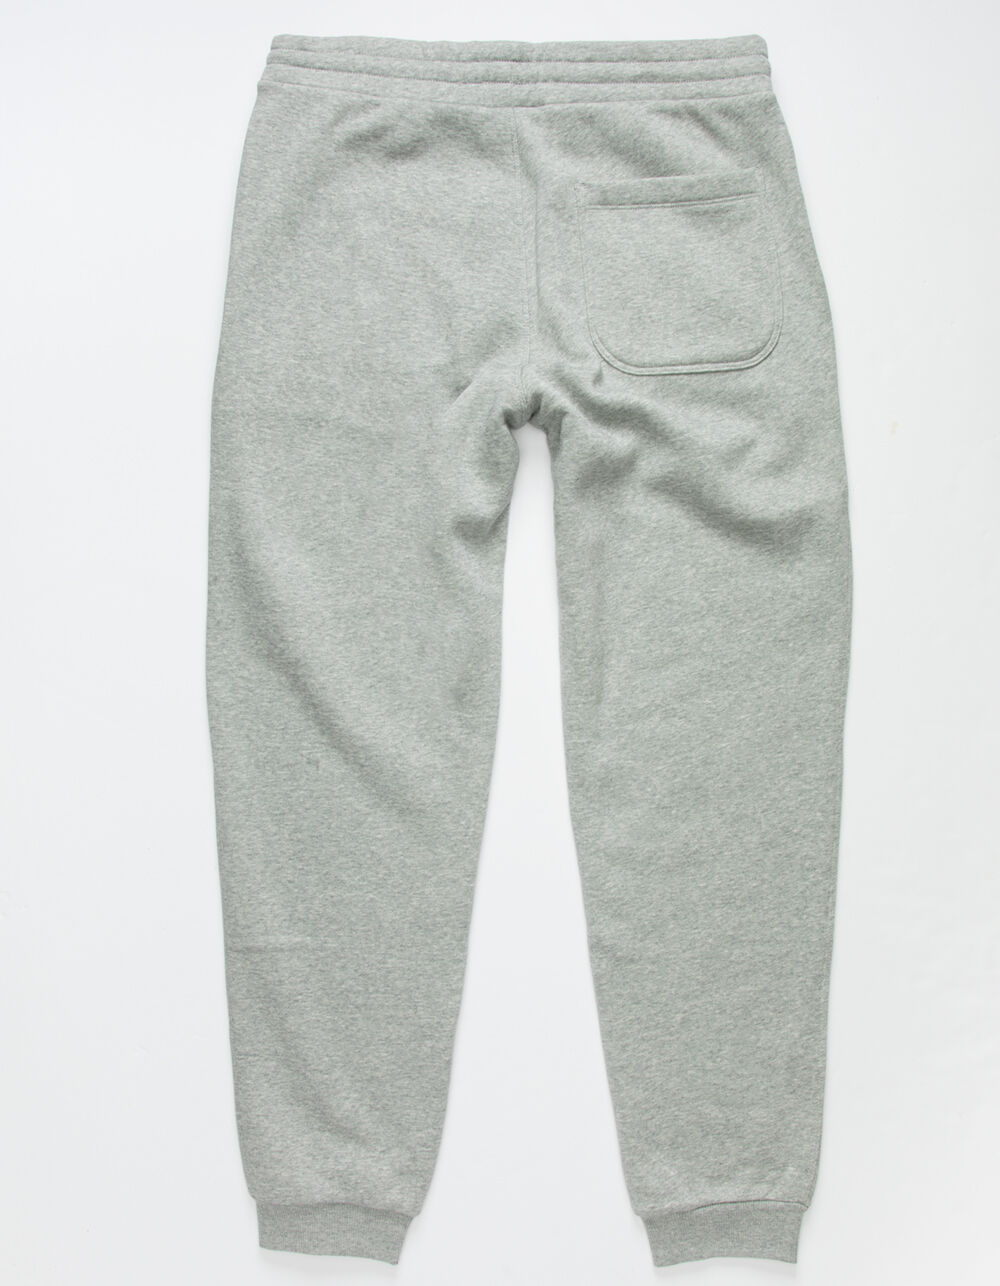 CONVERSE Embroidered Star Mens Sweatpants - GRAY | Tillys